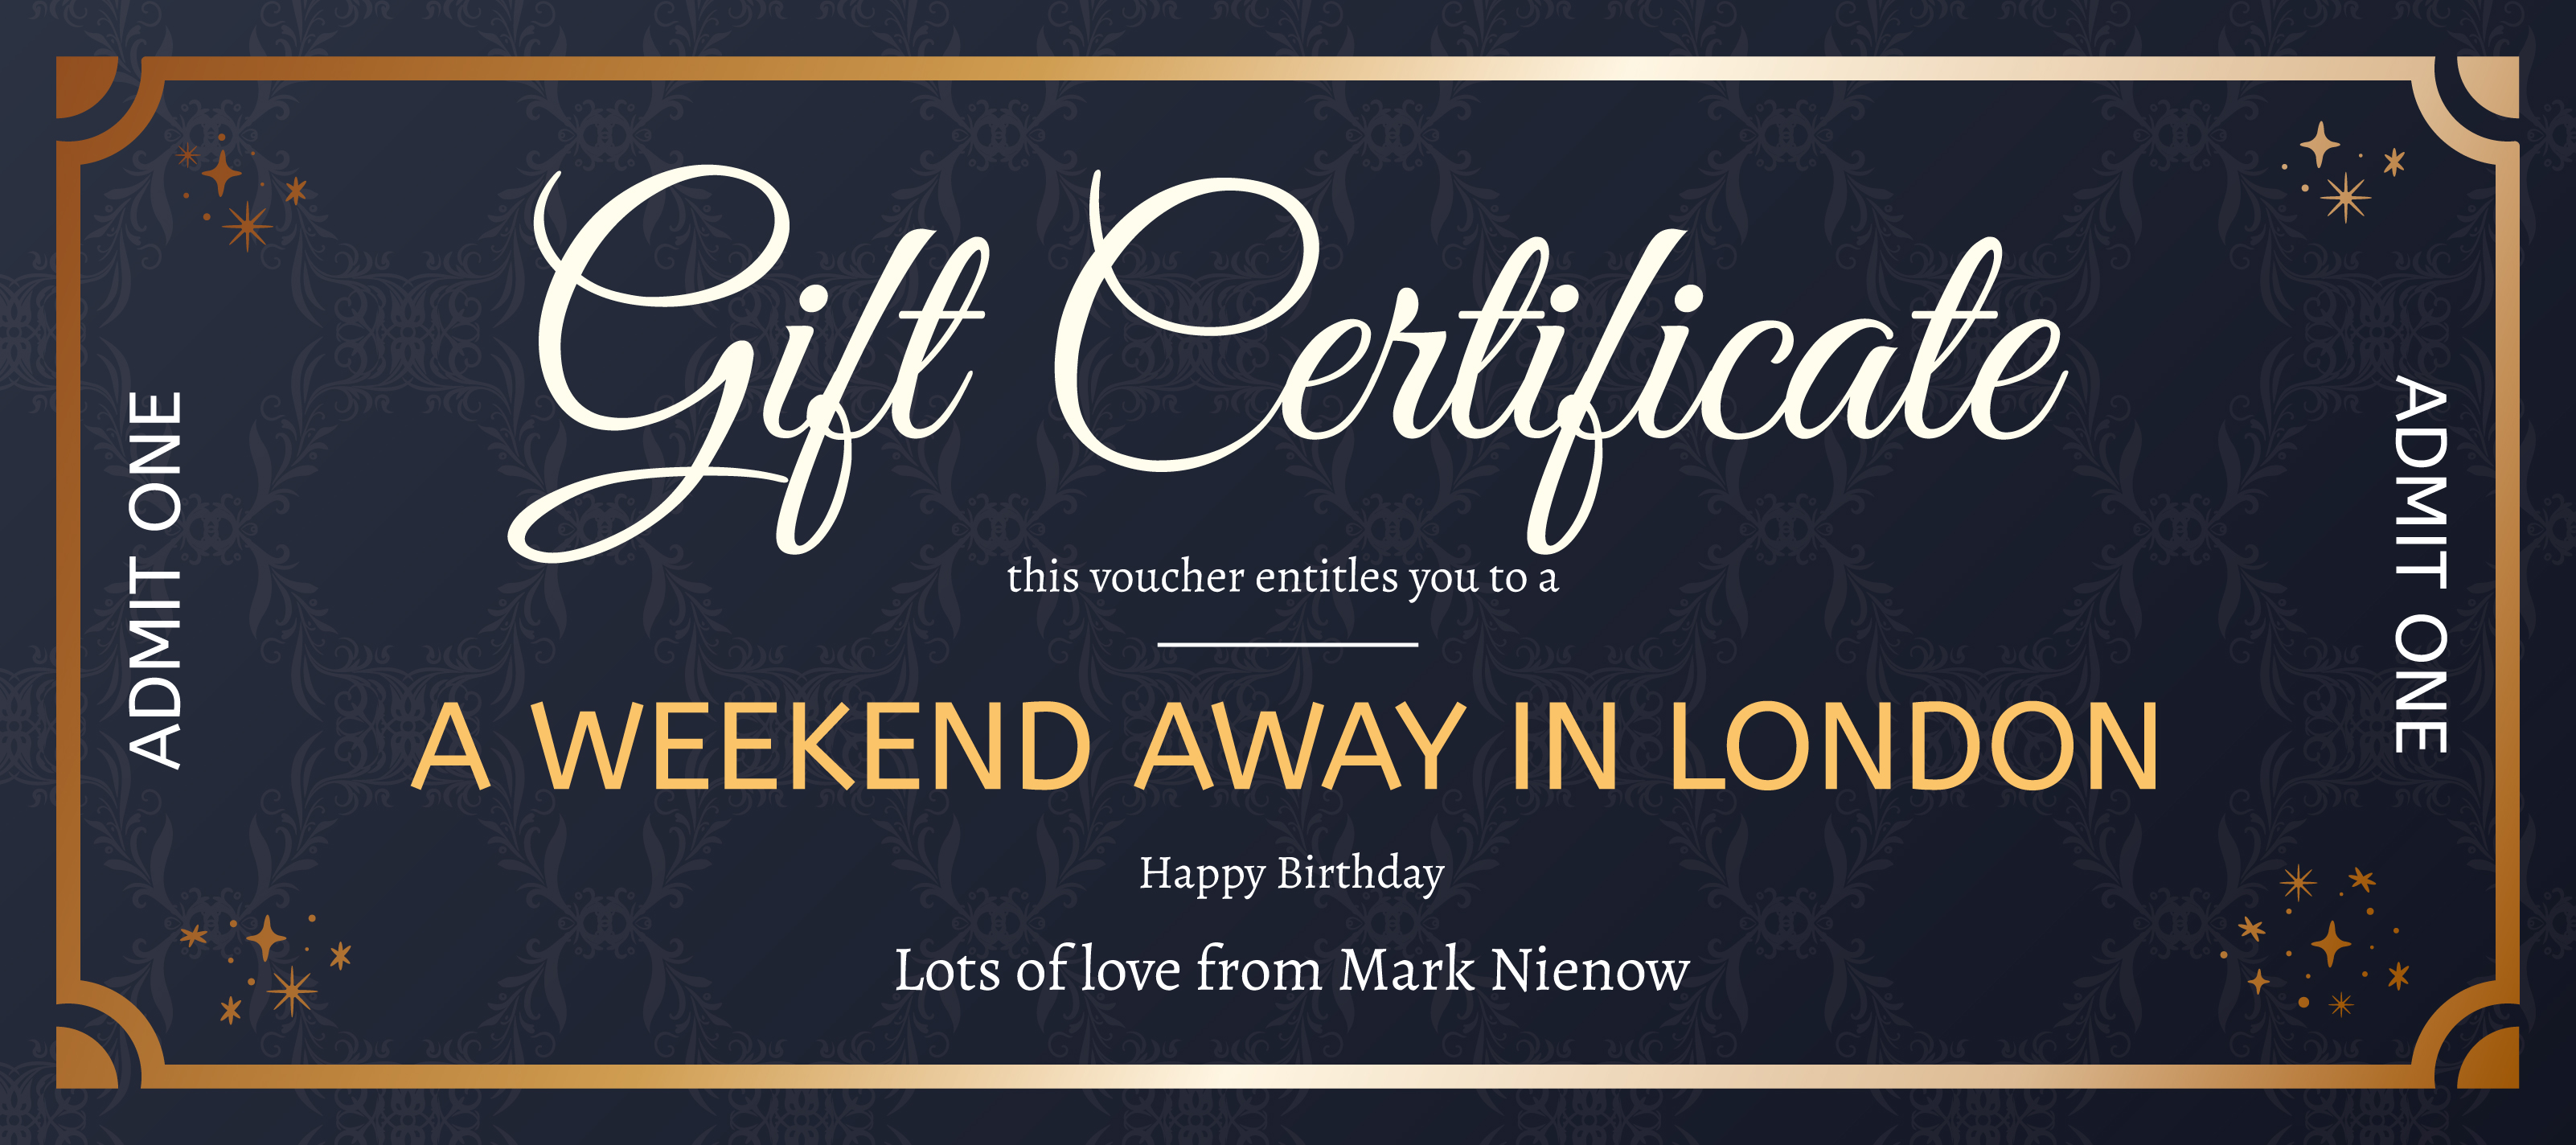 Best Certificate Of Authenticity Gift Ideas